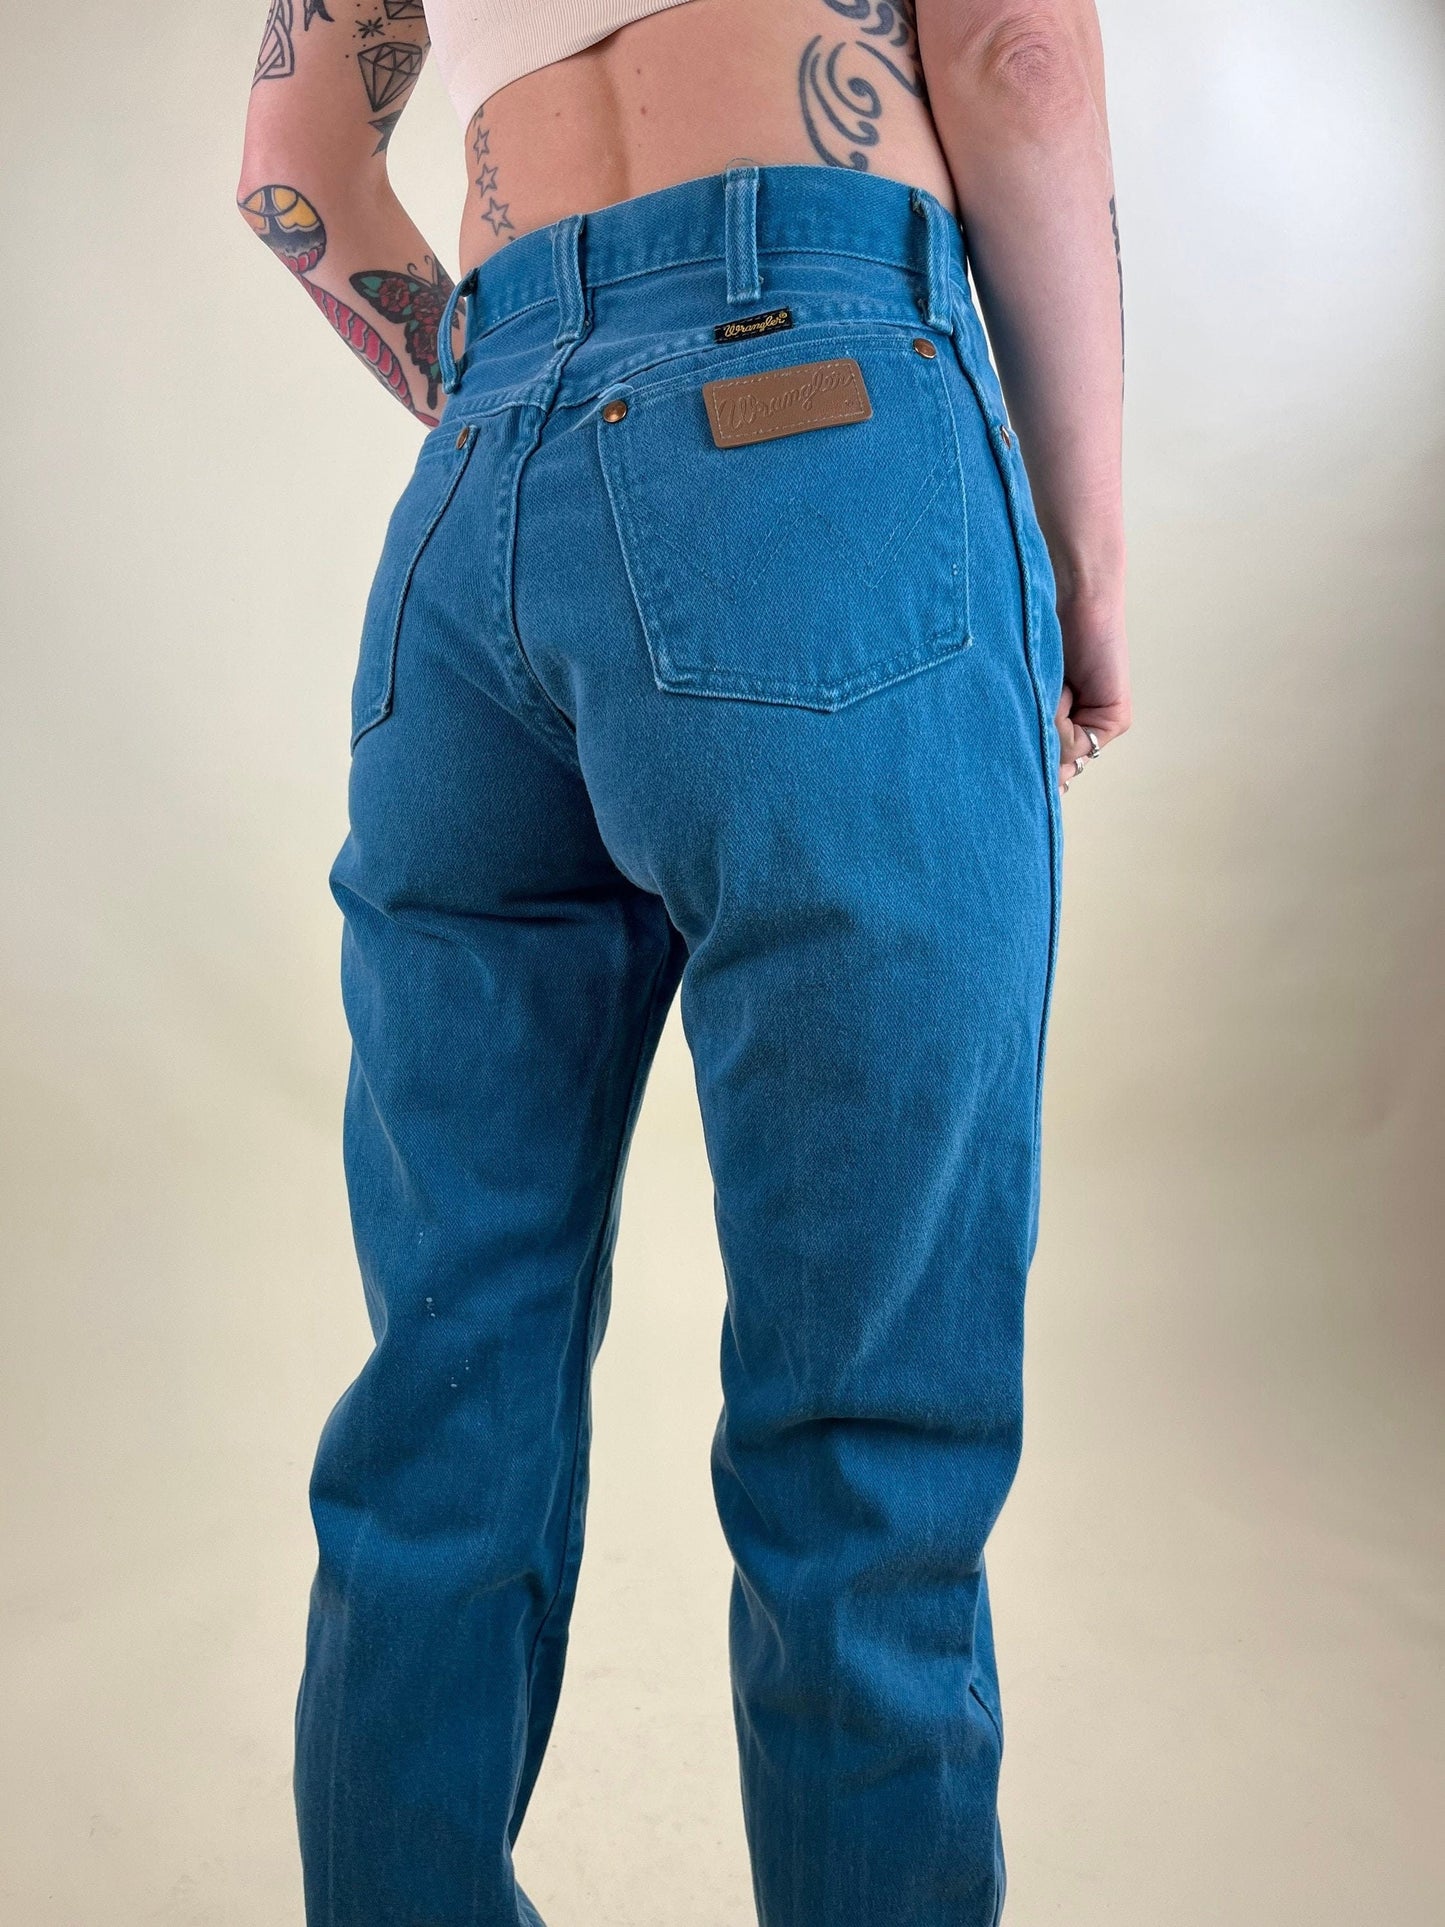 70s Wrangler Teal Blue Jeans / Made in USA / 26"